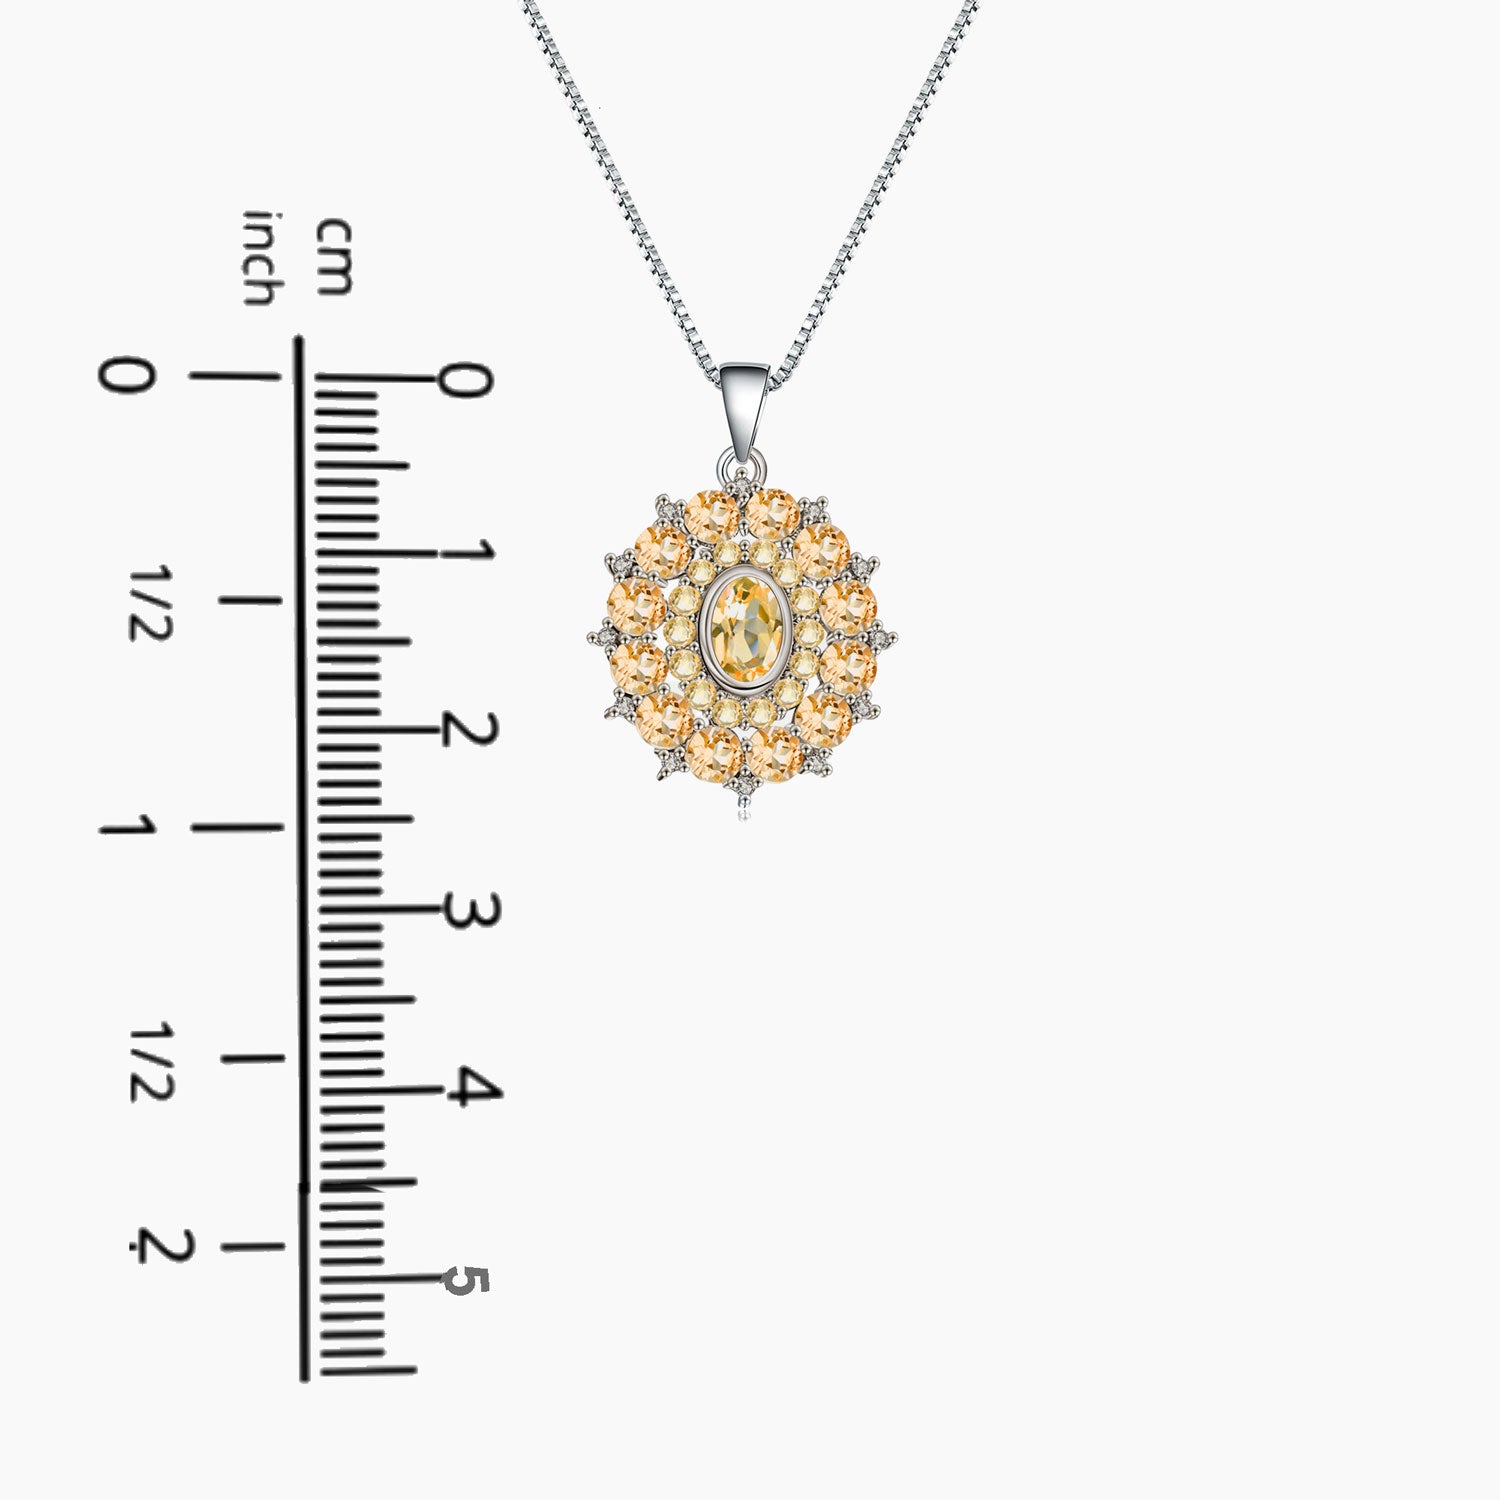 Citrine Crown Pendant in Sterling Silver - Scale image showing pendant size relative to a ruler or coin for accurate measurement reference